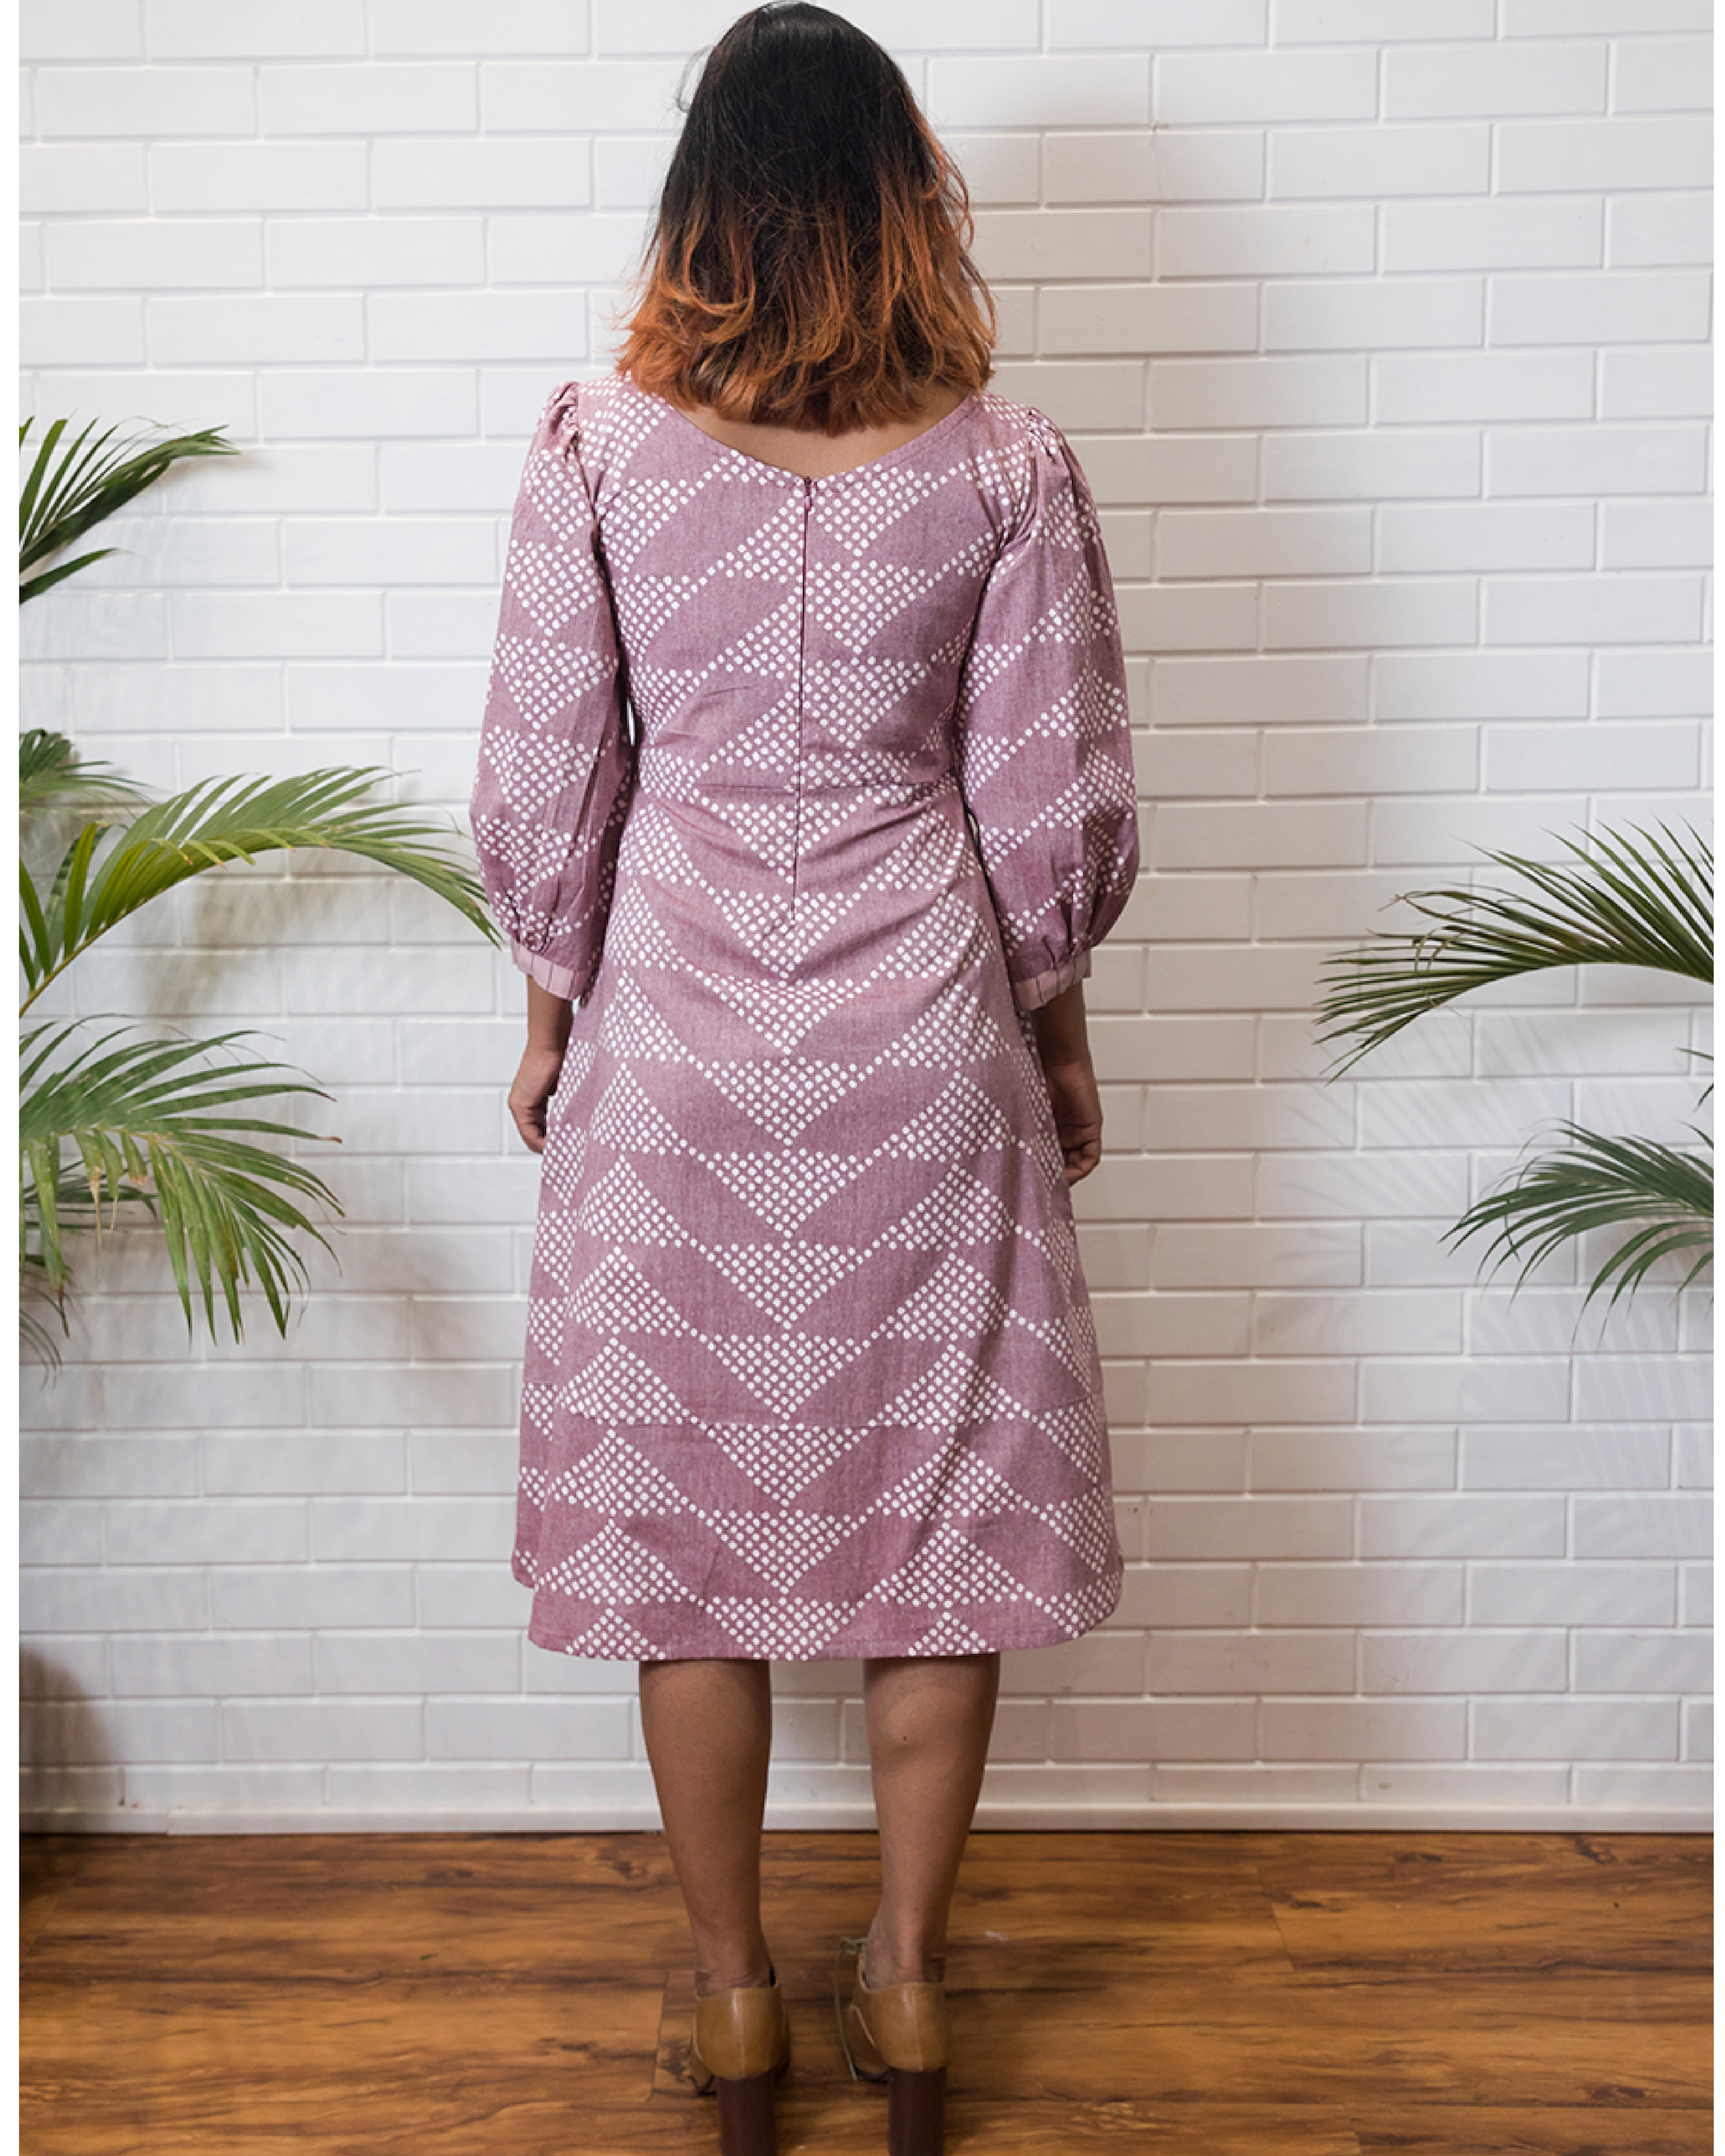 Lavender puff sleeves dress by Why So Blue | The Secret Label